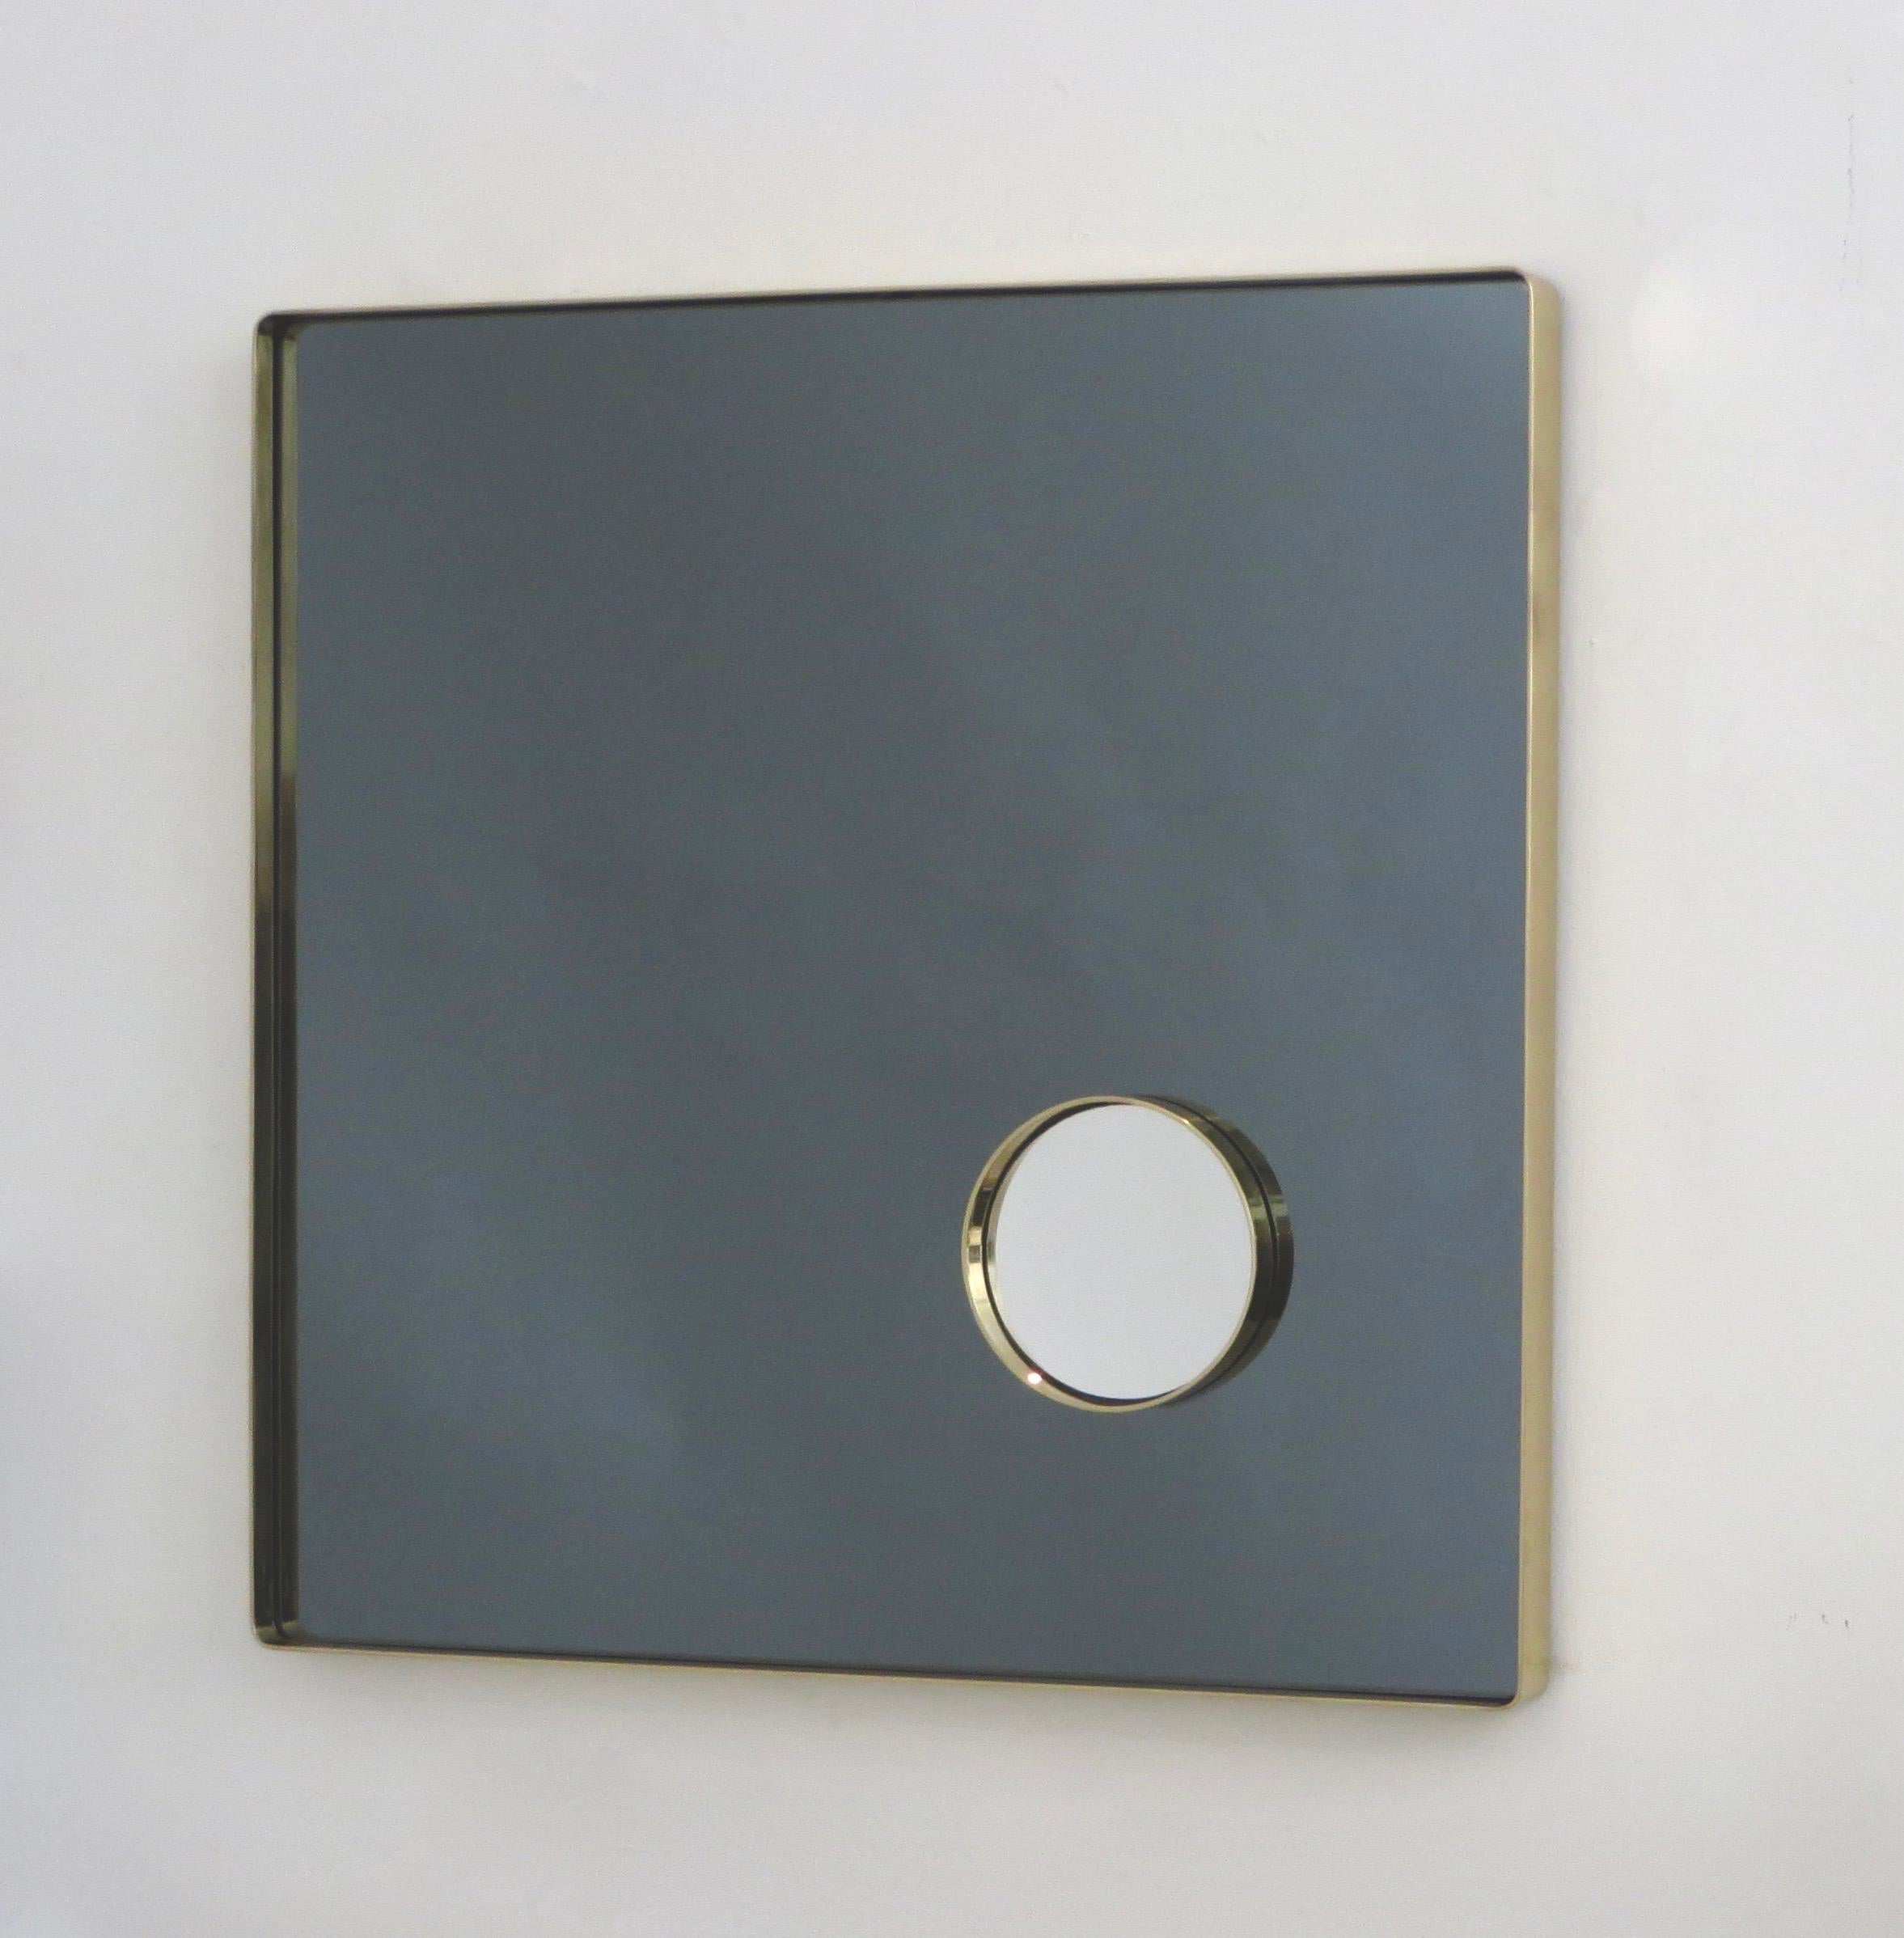 Italian brass framed square smoked light grey mirror with an inset brass framed clear circle of sorciere mirror attributed to Lino Sabattini.
The brass frame is in perfect condition with no pitting or discoloration.
The small inserted perfectly